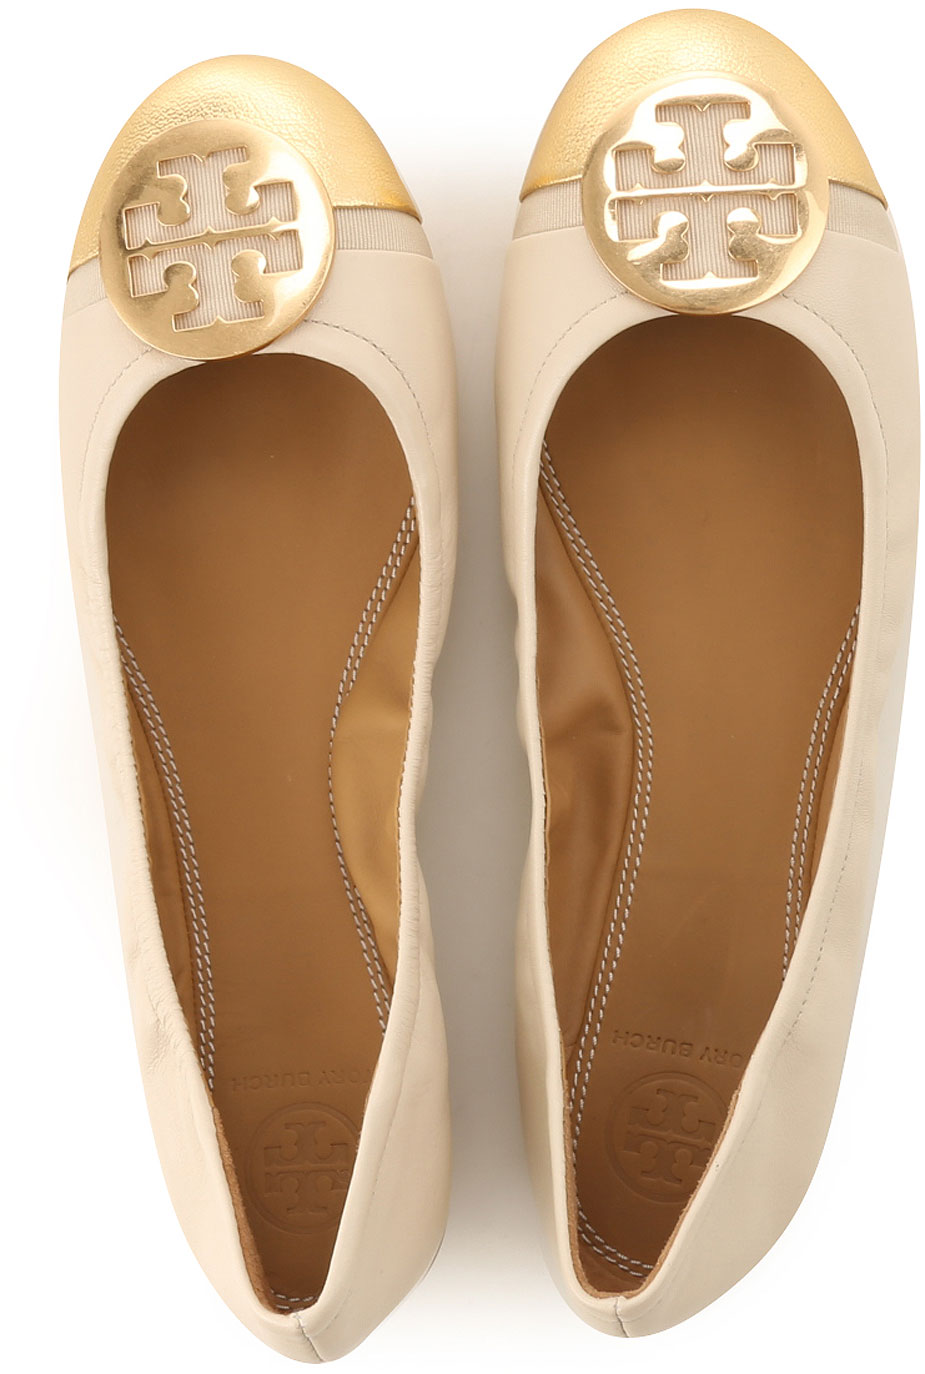 Womens Shoes Tory Burch, Style code: 63177-253-